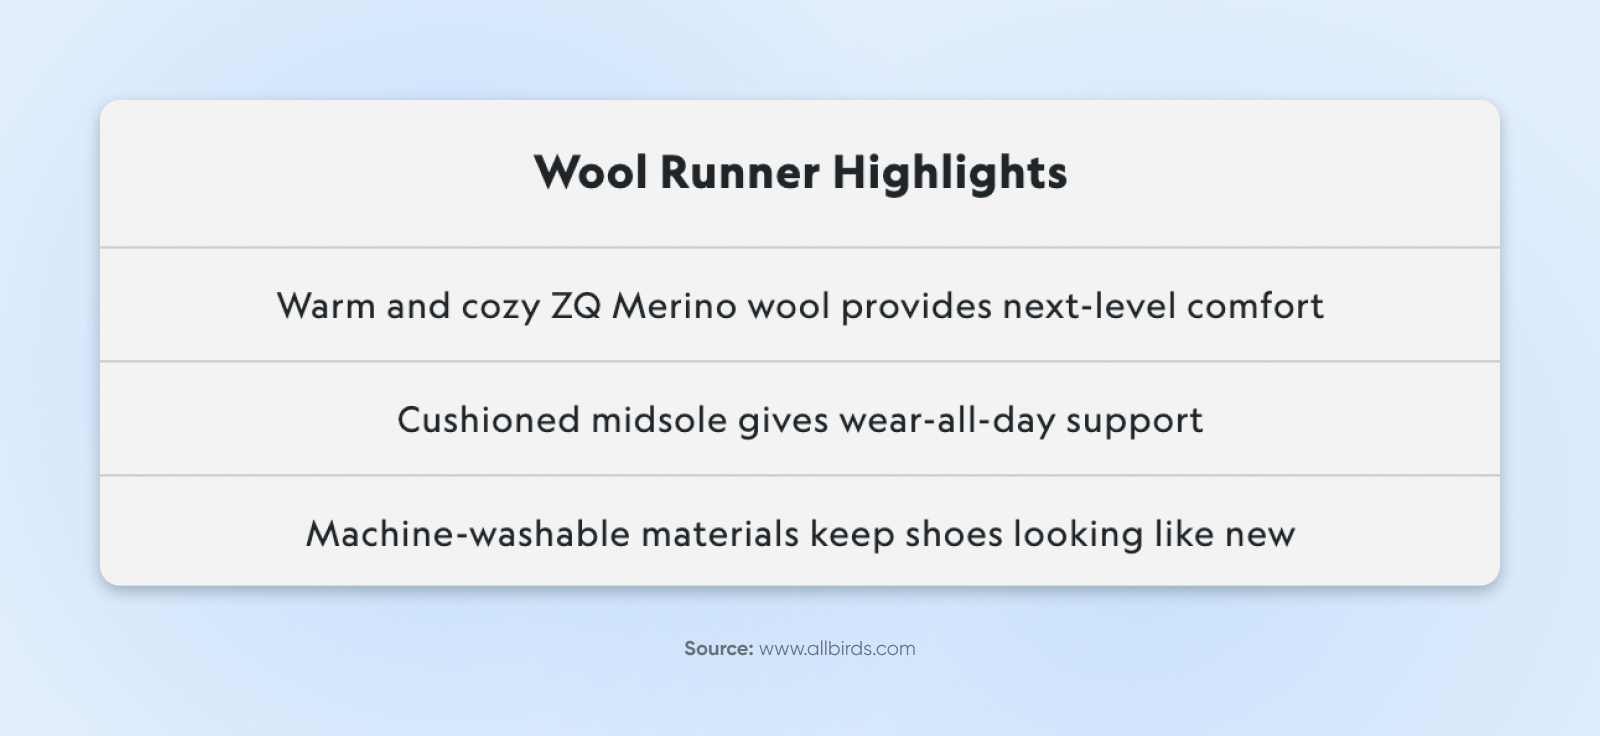 A simple chart from the Allbirds website calls out product features of its Wool Runner shoe